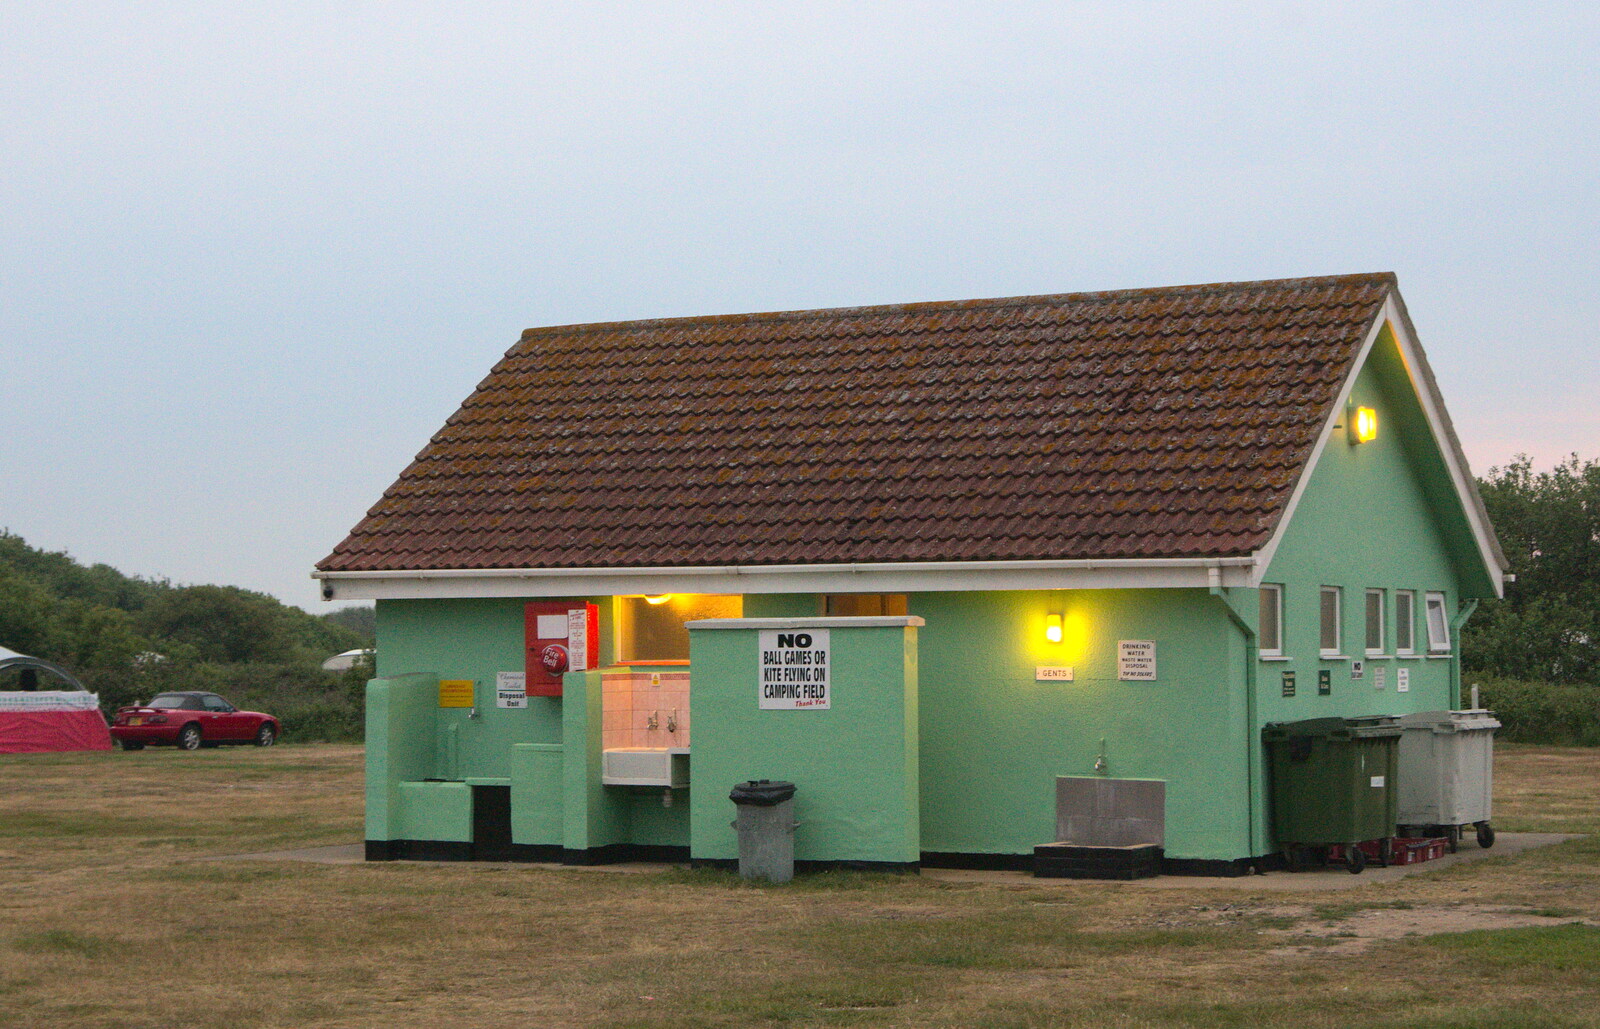 1980s toilet block, with intermittent electricity from A Wet Weekend of Camping, Waxham Sands, Norfolk - 13th June 2015